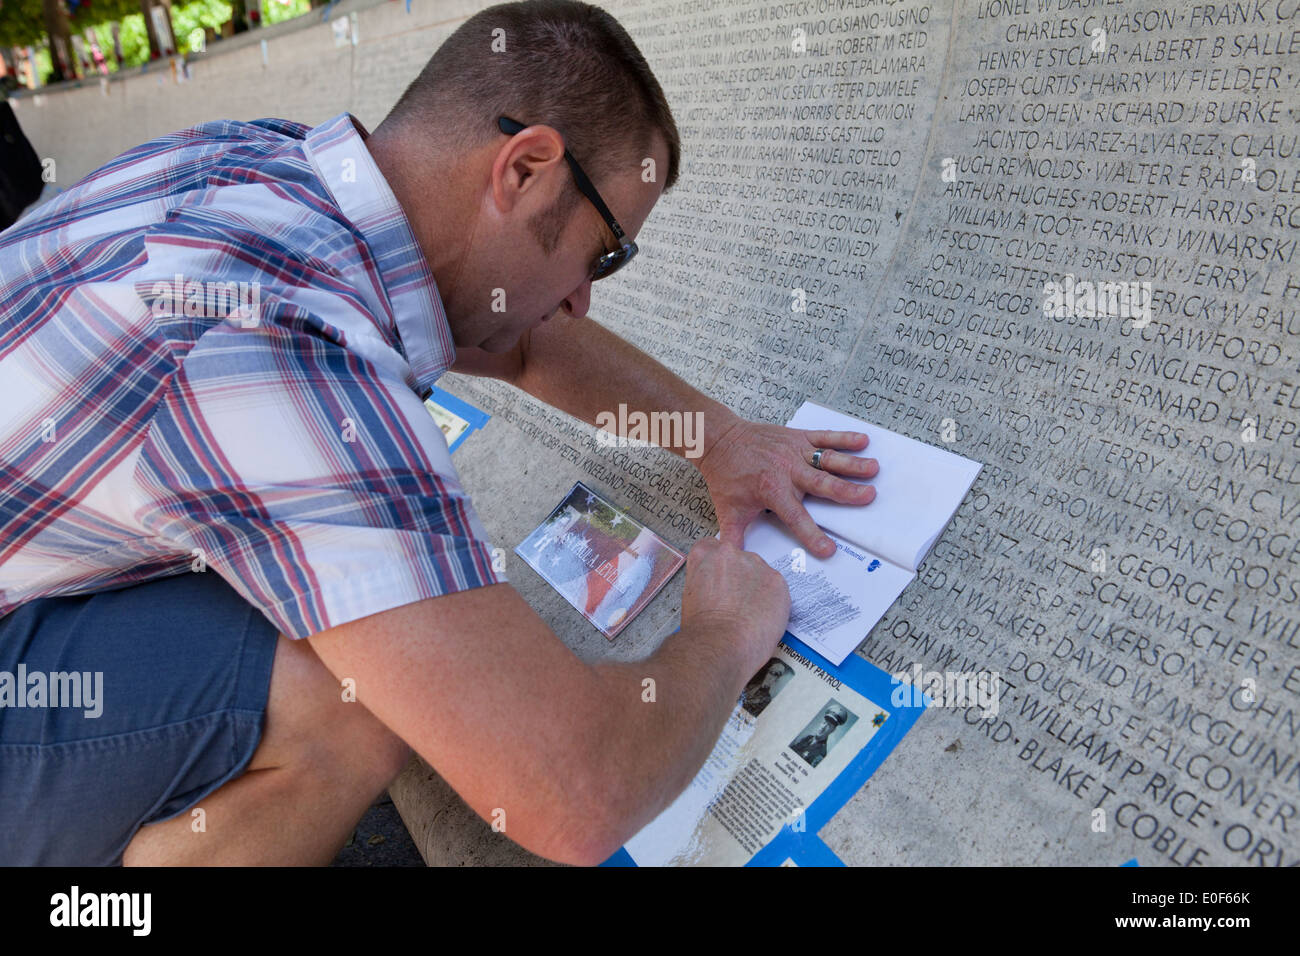 National Law Enforcement Officers Memorial - Washington, DC USA Stock Photo